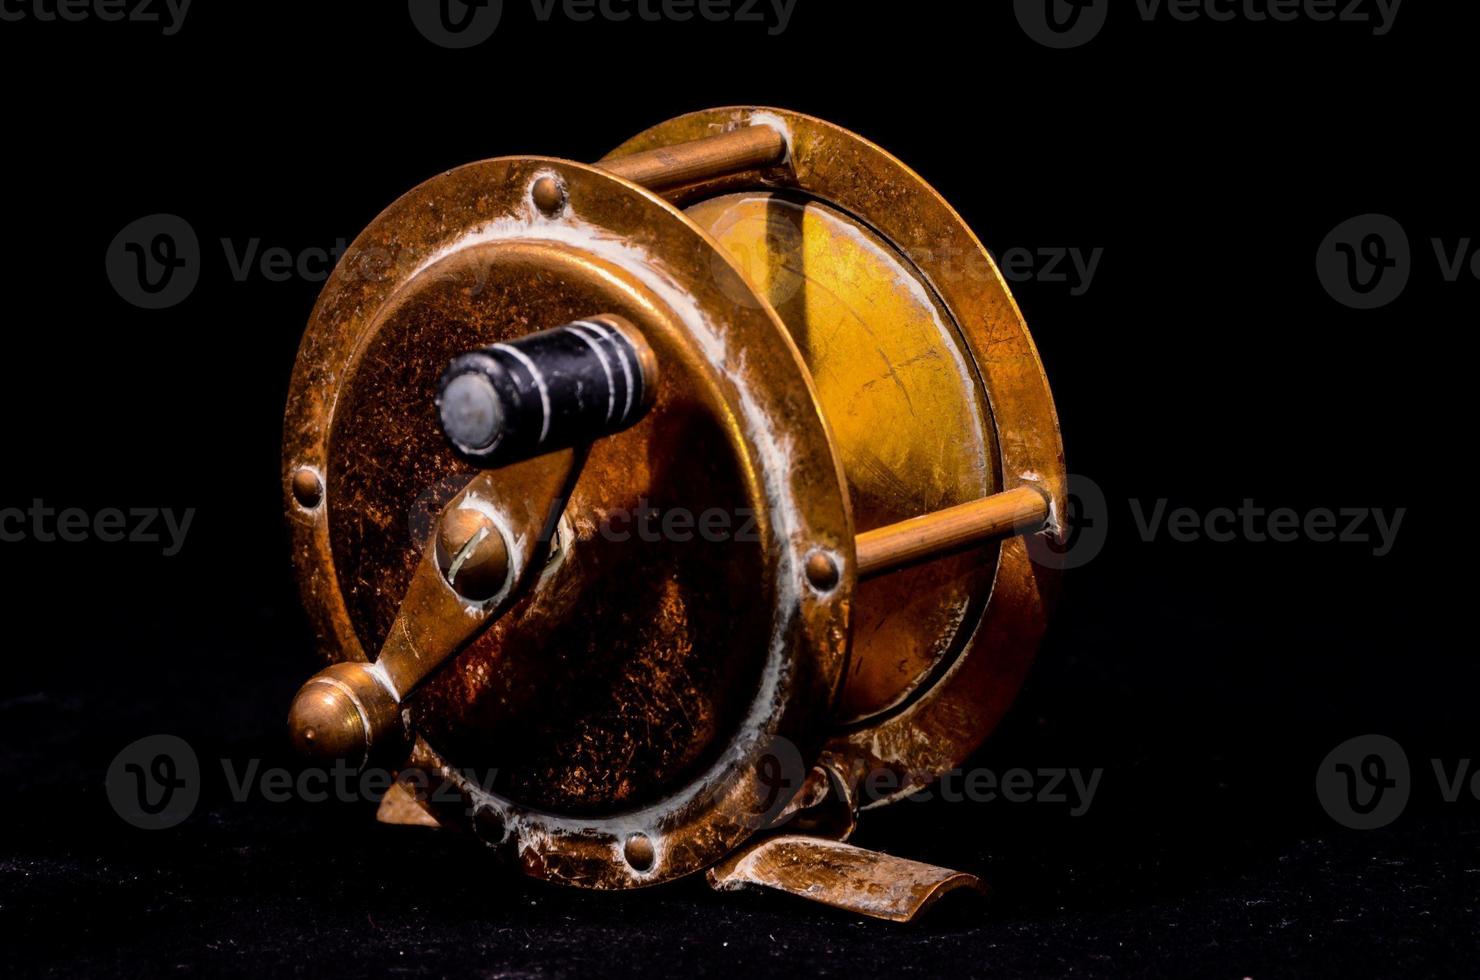 Old Retro Openface Spinning Reel On White Stock Photo - Download